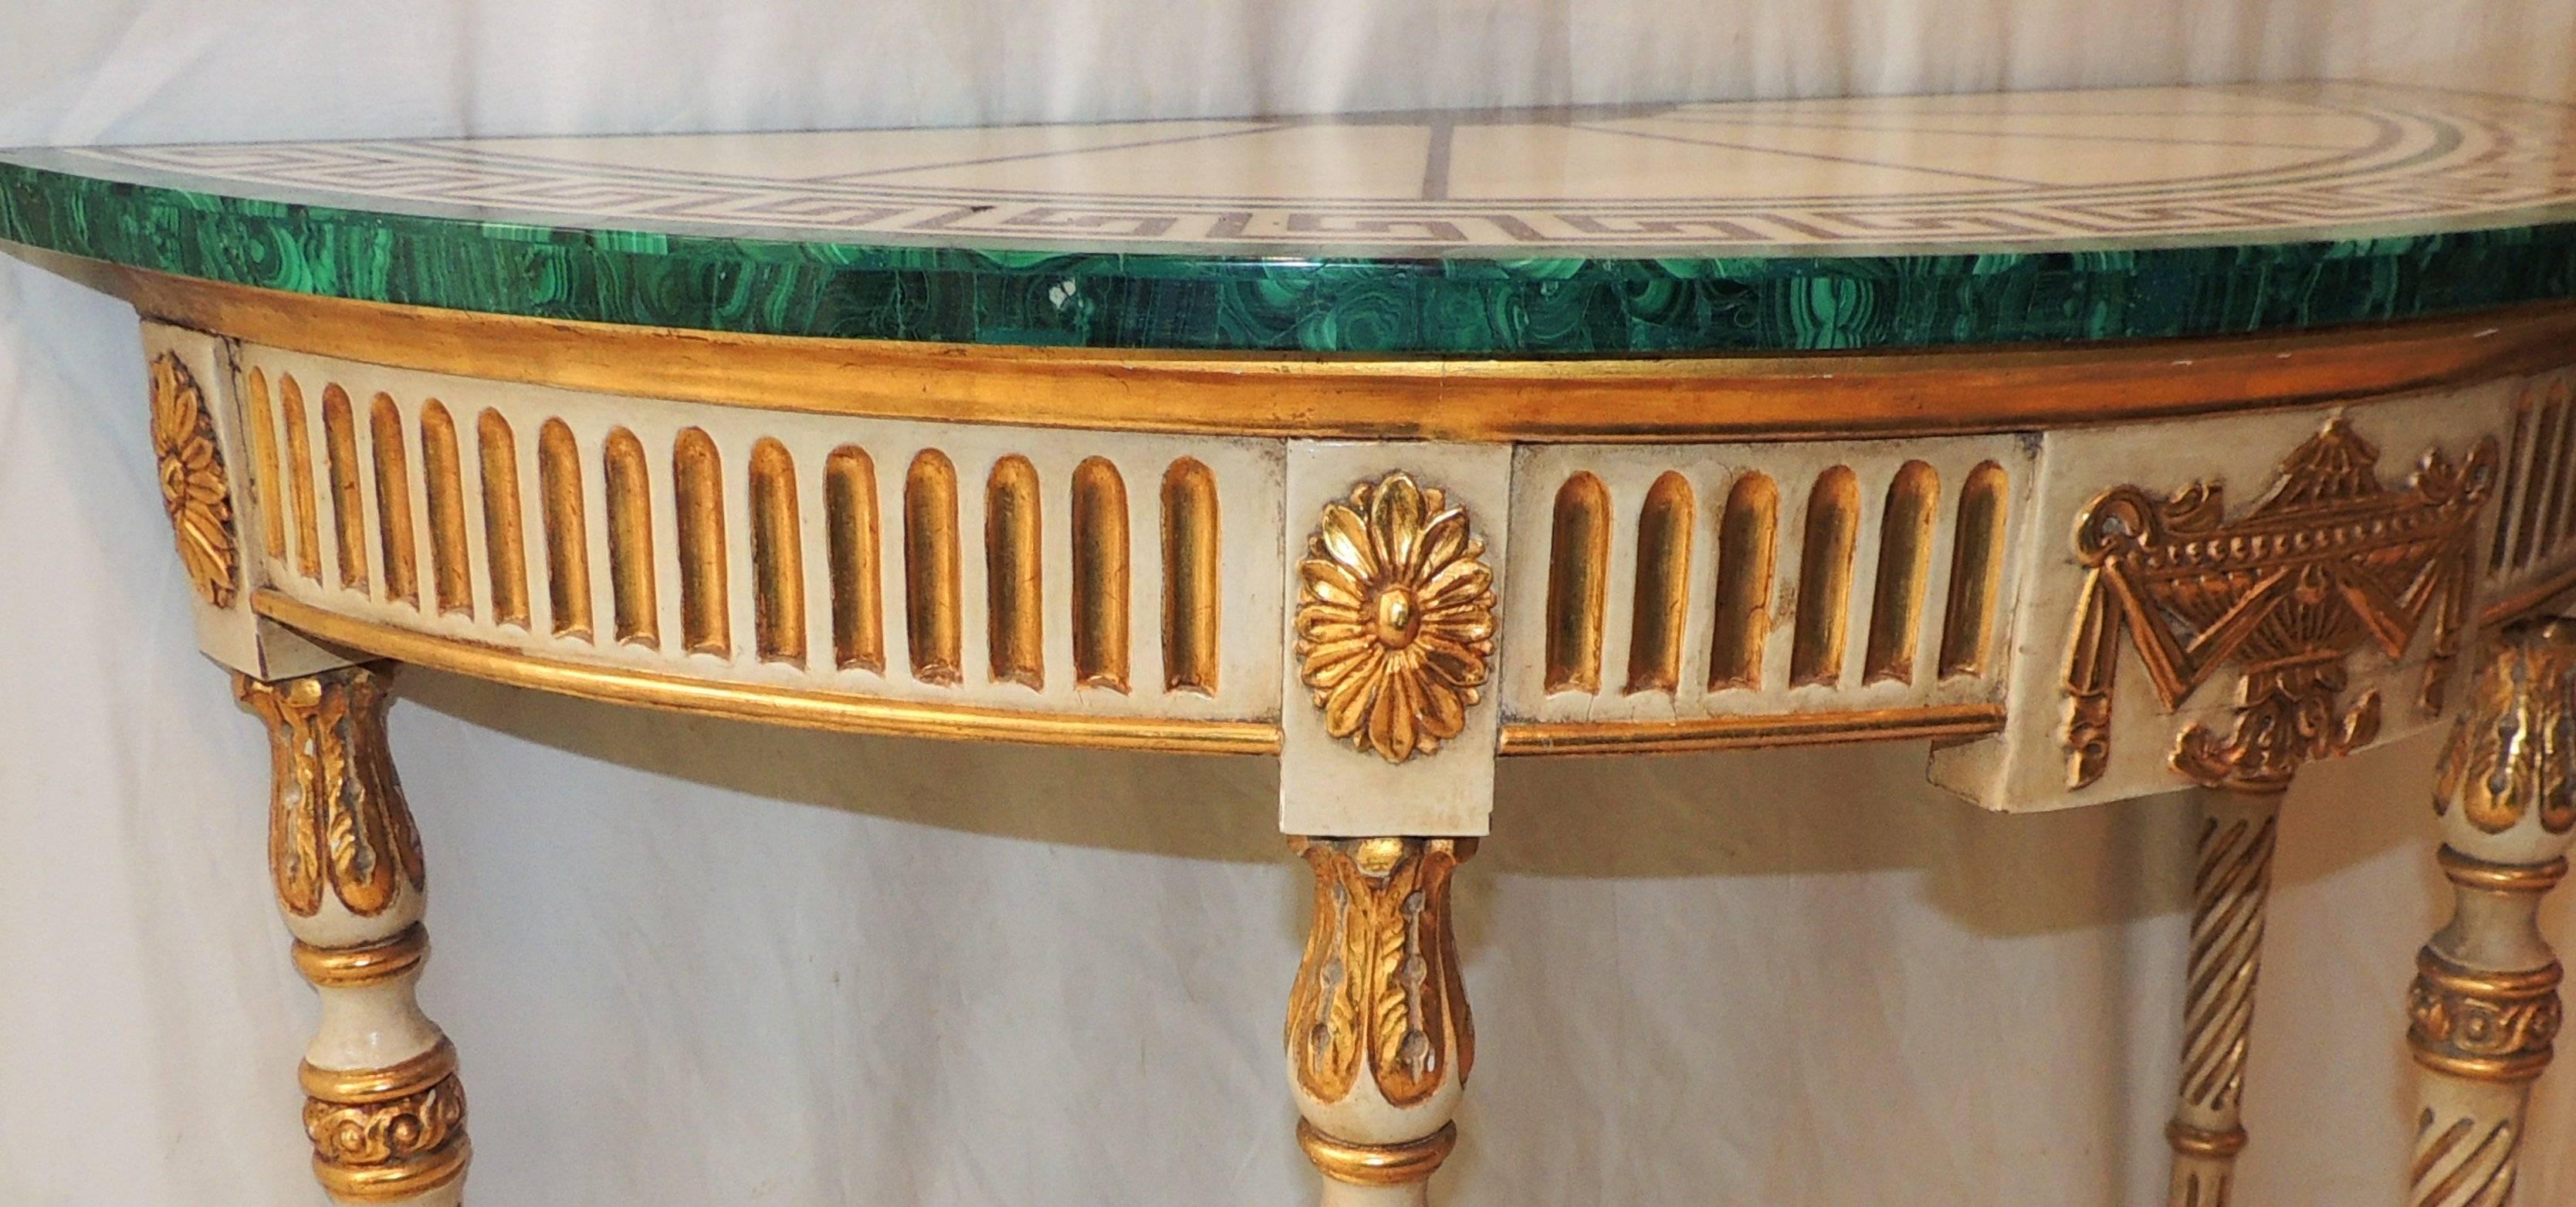 Early 20th Century Wonderful French Carved Wood Malachite Marble Greek Key Demilune Console Table